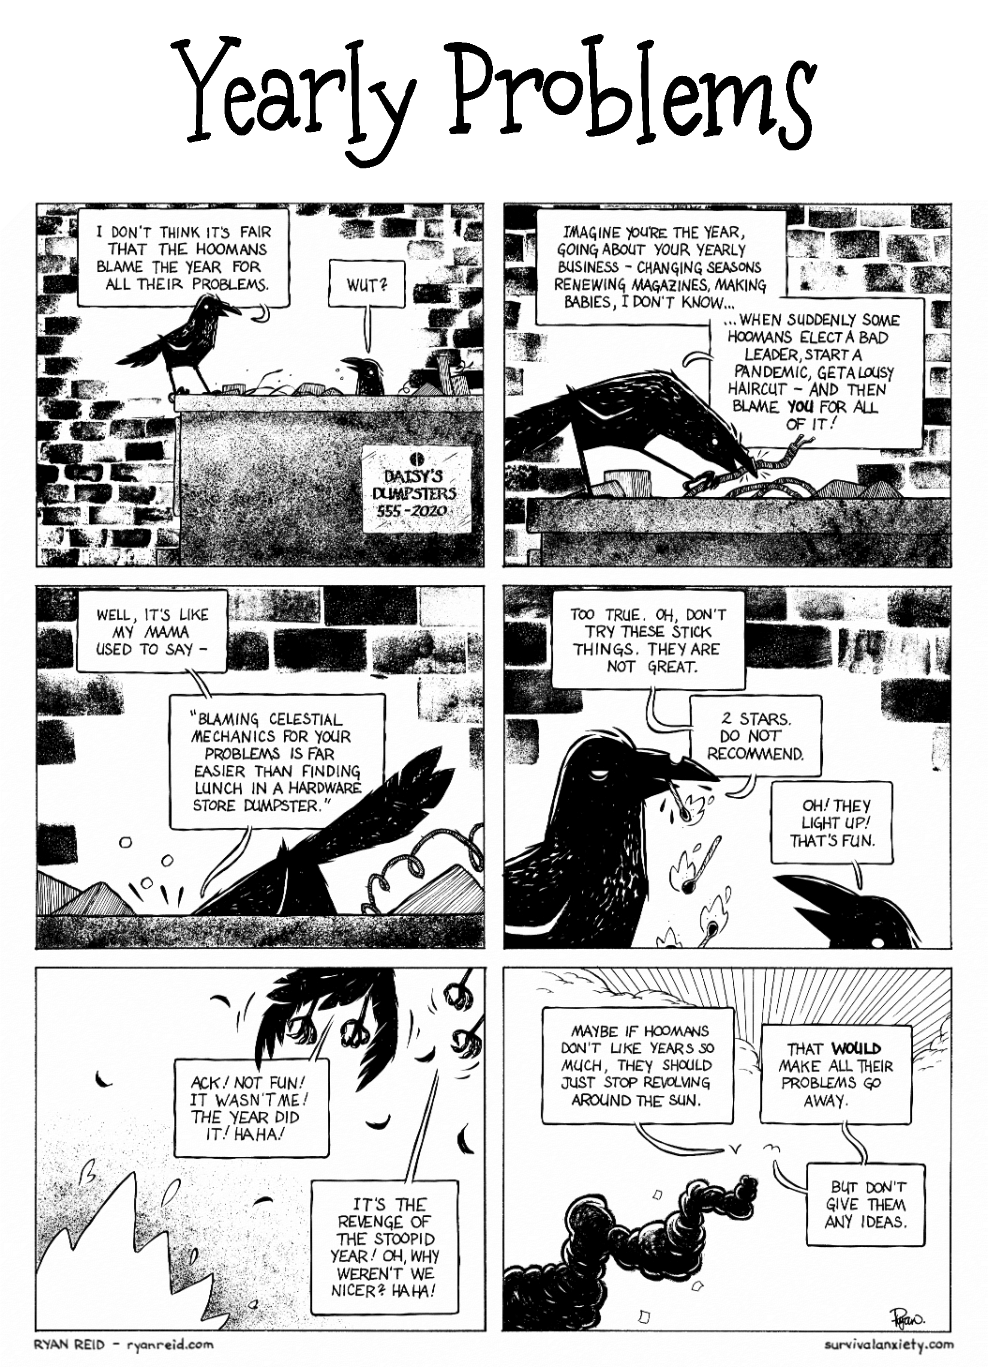 In this comic, the crows discuss how hoomans blame the year for all their problems.